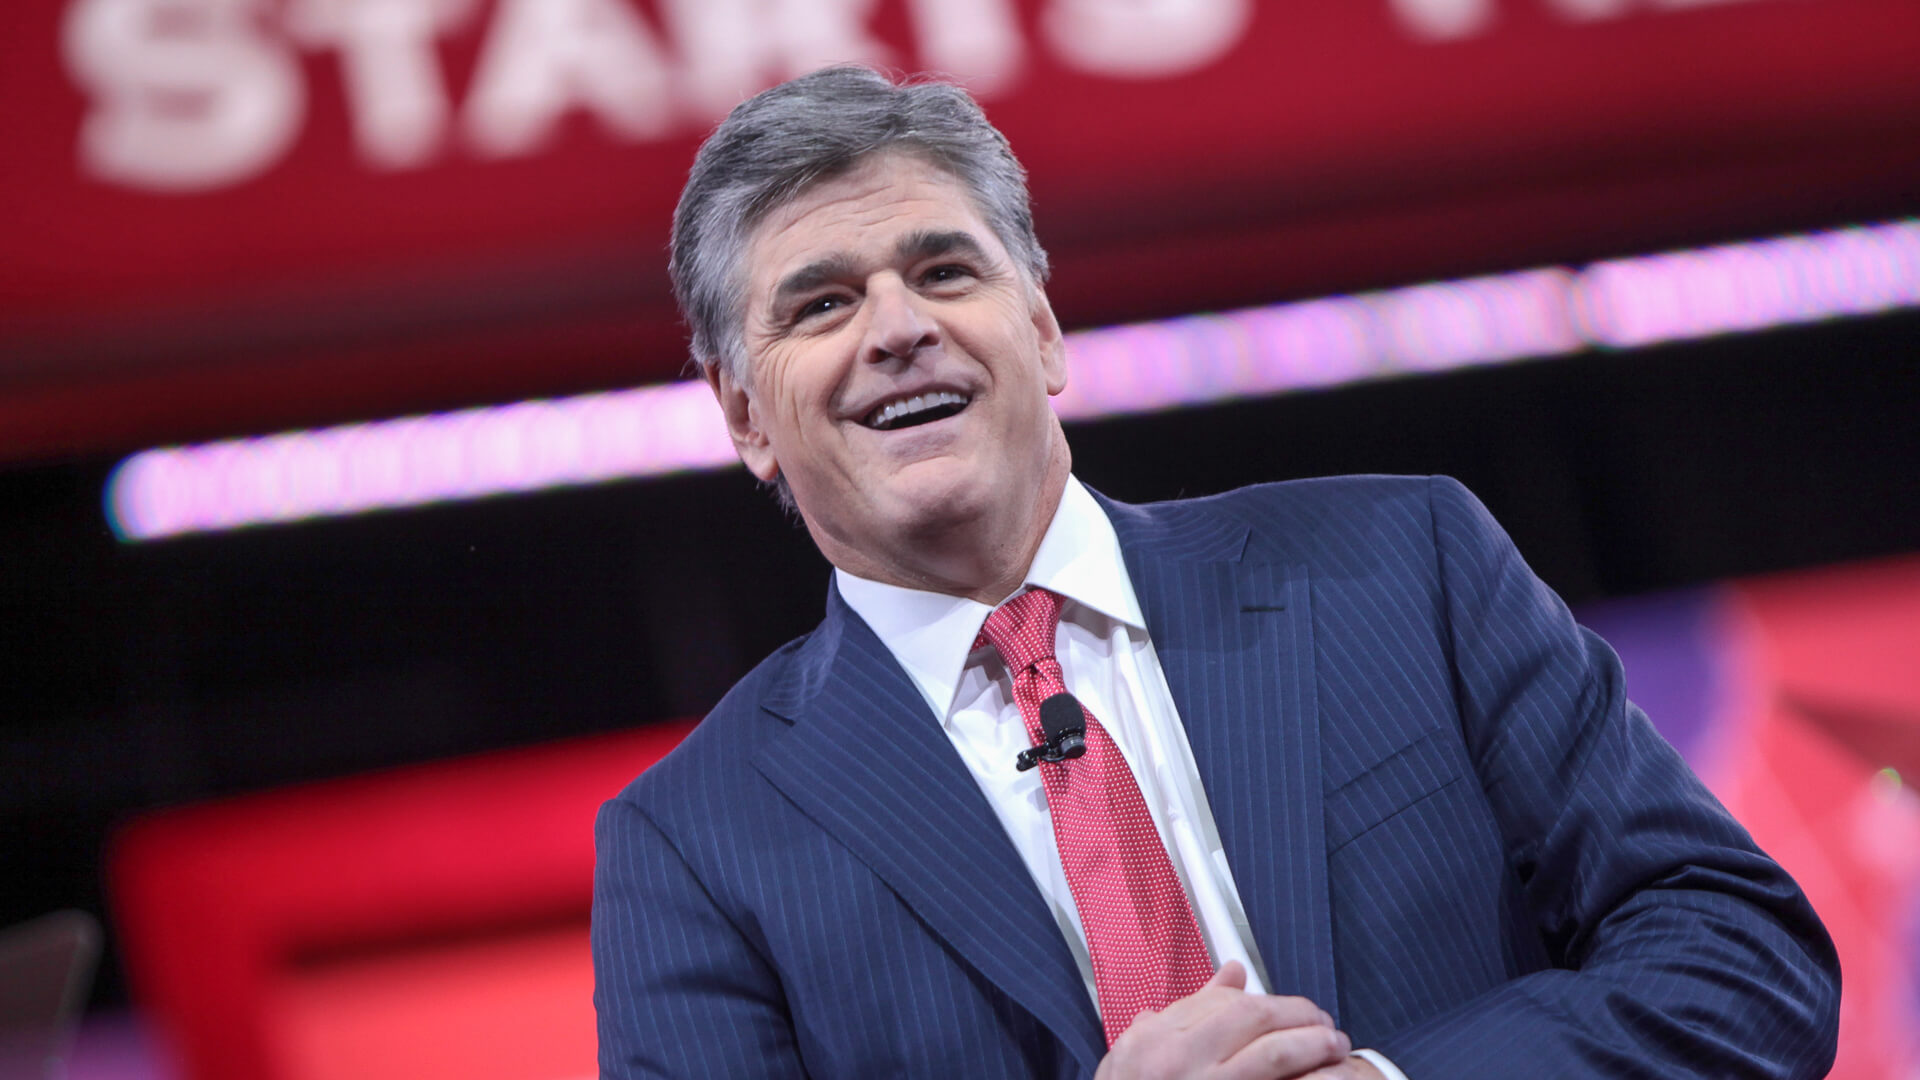 Sean Hannity Net Worth His Fox News, Real Estate Investment